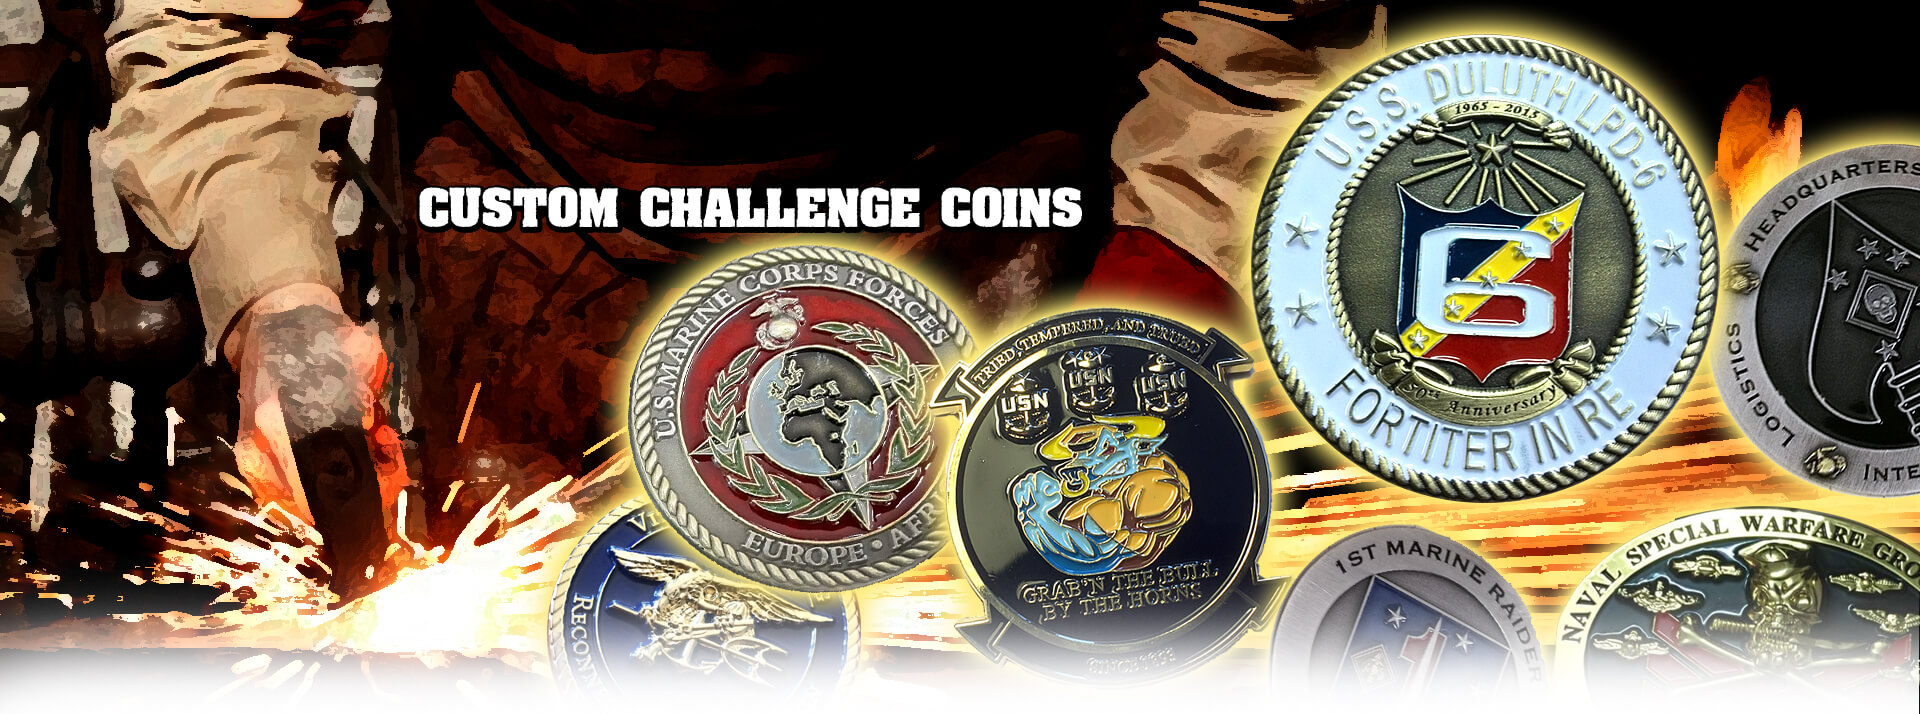 Exclusive Military Challenge Coins: The History